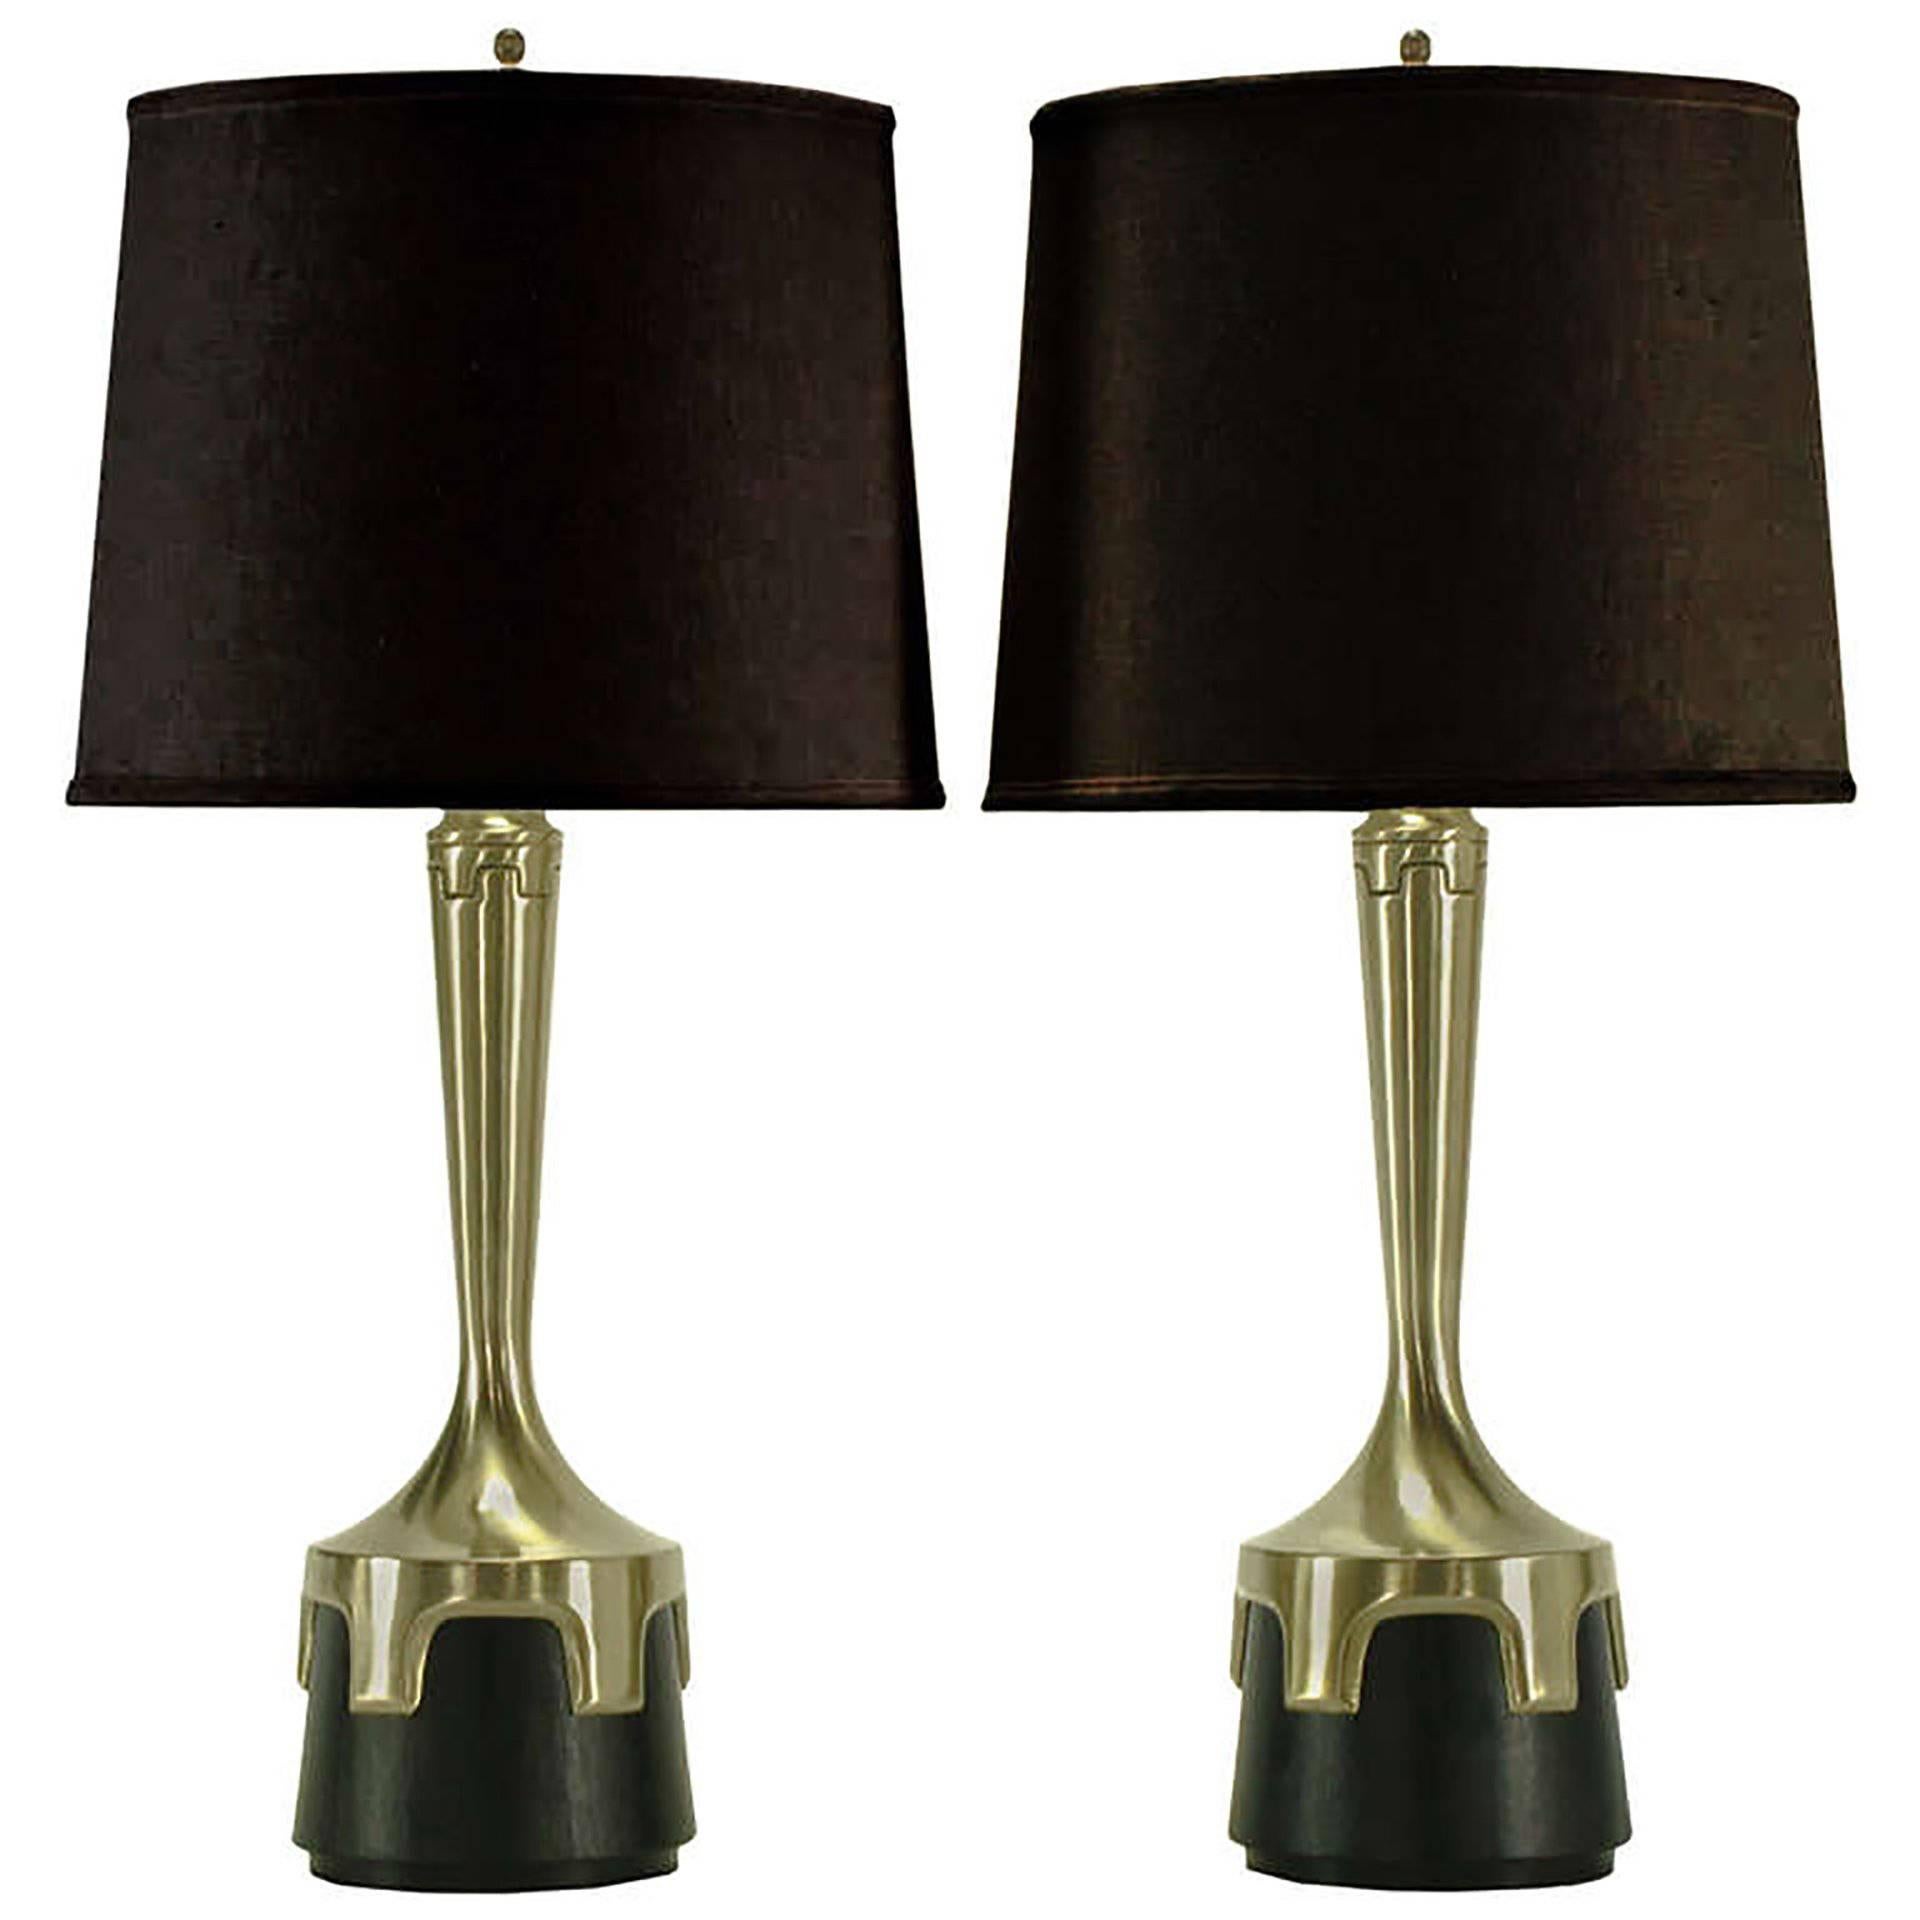 Pair of Frederick Cooper Nickel and Ebonized Walnut Table Lamps